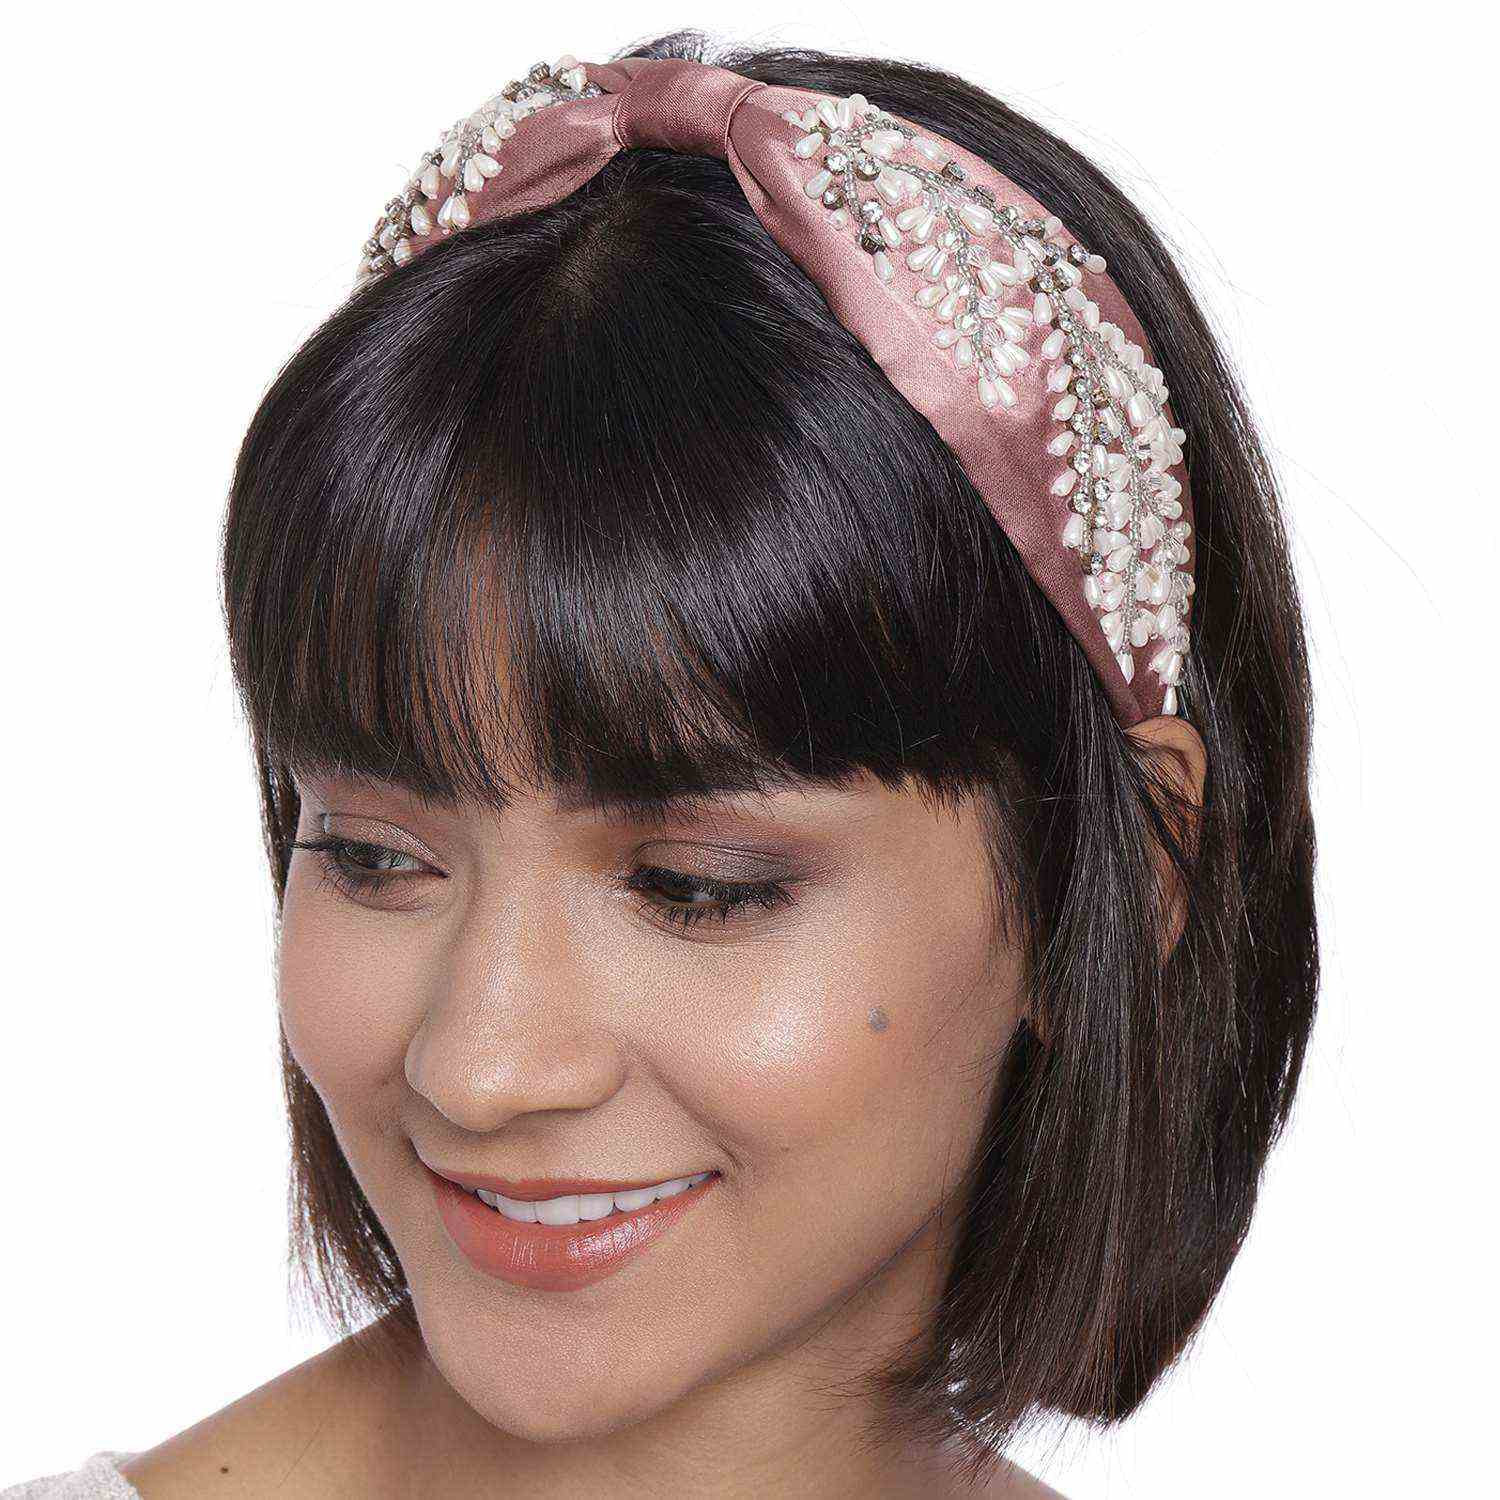 Betty Cooper In Mauve Satin with Intricate Veil Embroidery Headband